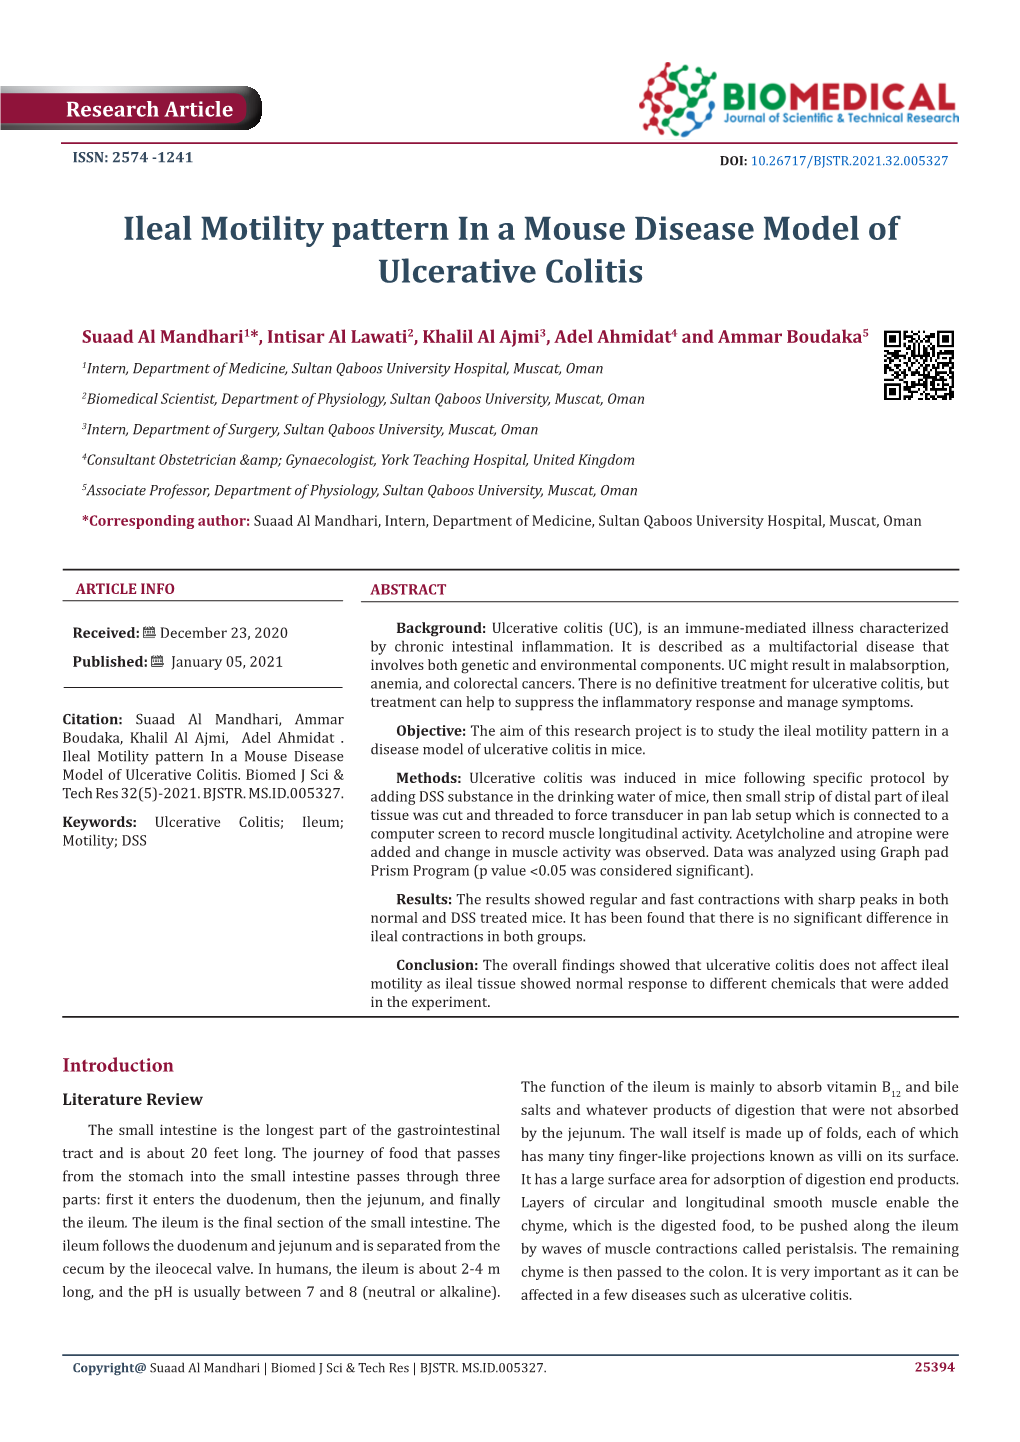 Ileal Motility Pattern in a Mouse Disease Model of Ulcerative Colitis